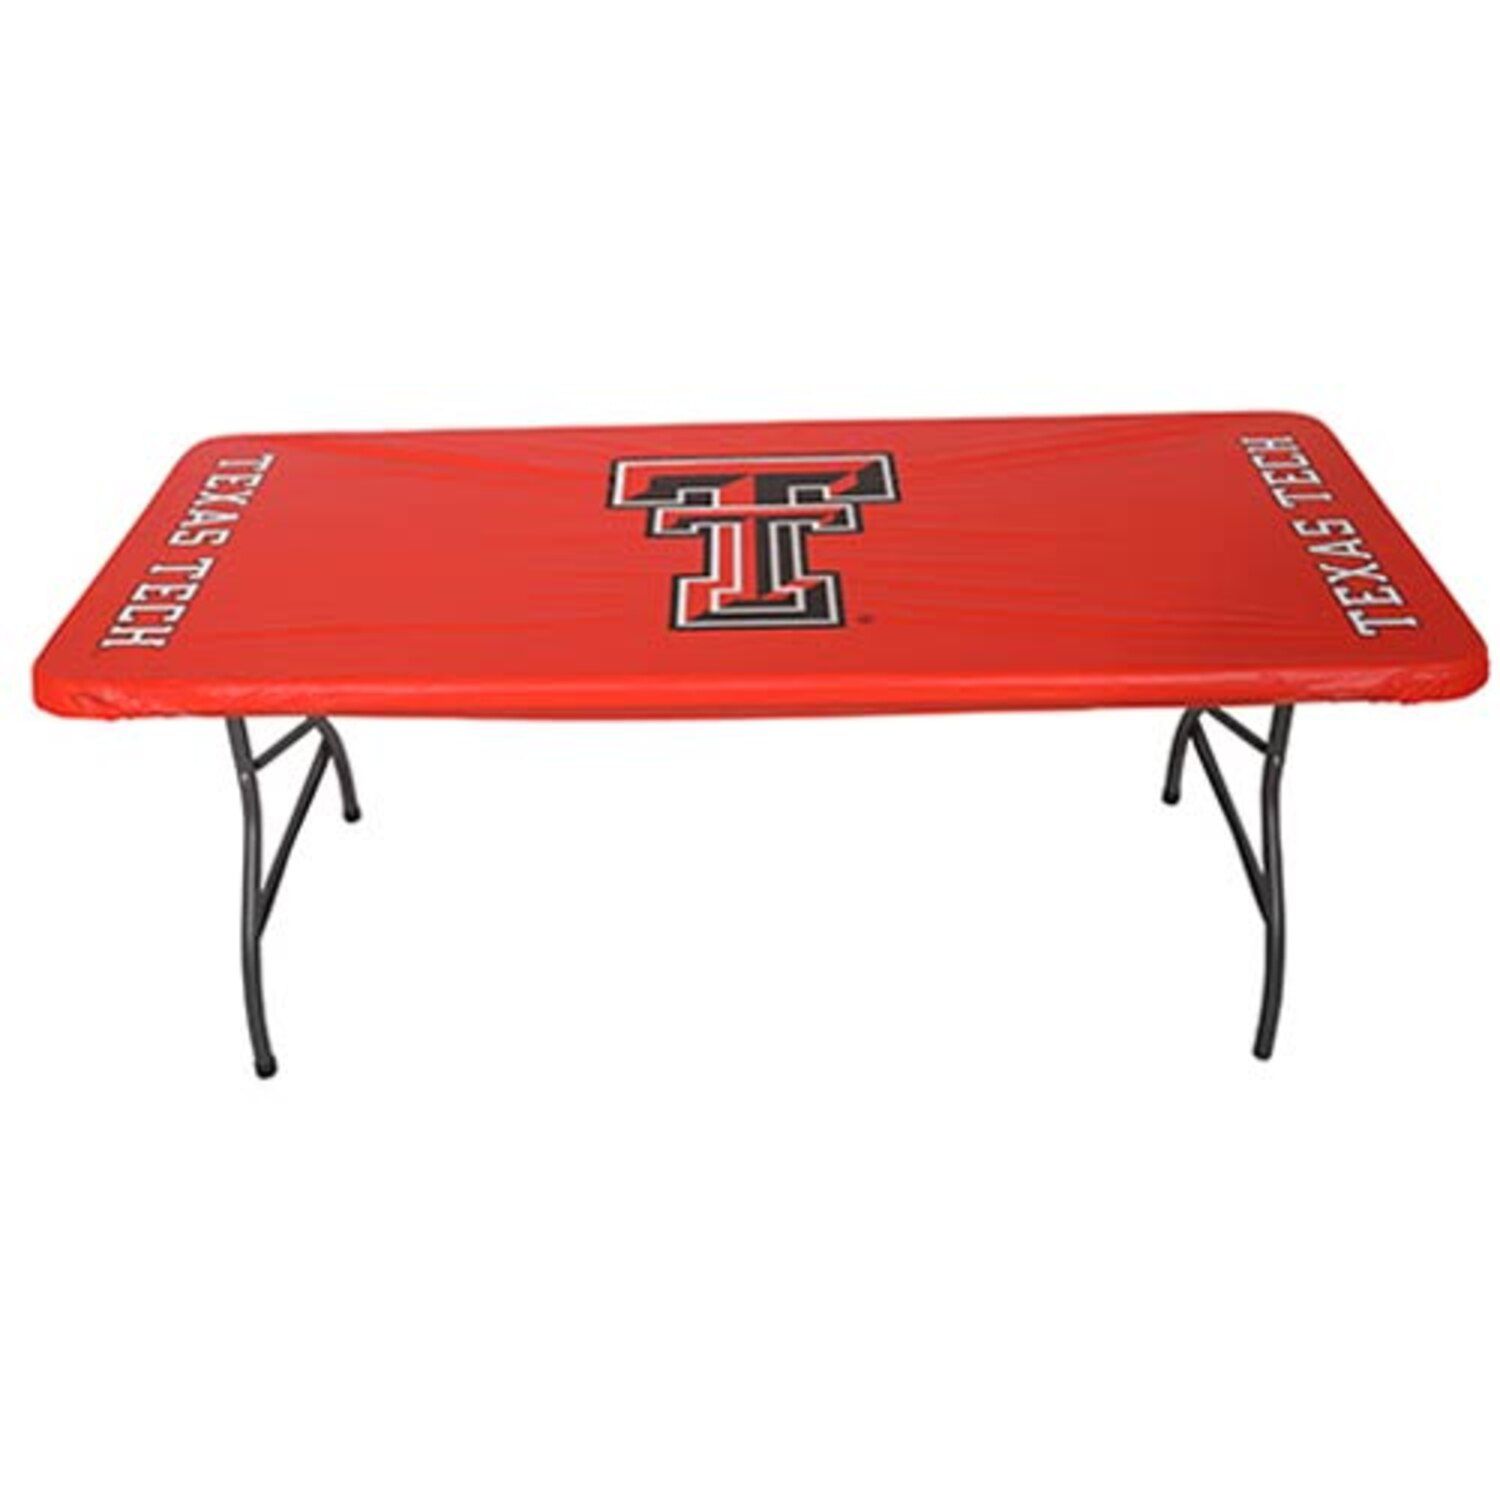 Image for Unbranded Texas Tech Red Raiders Fitted Tailgate Table Cover at Kohl's.